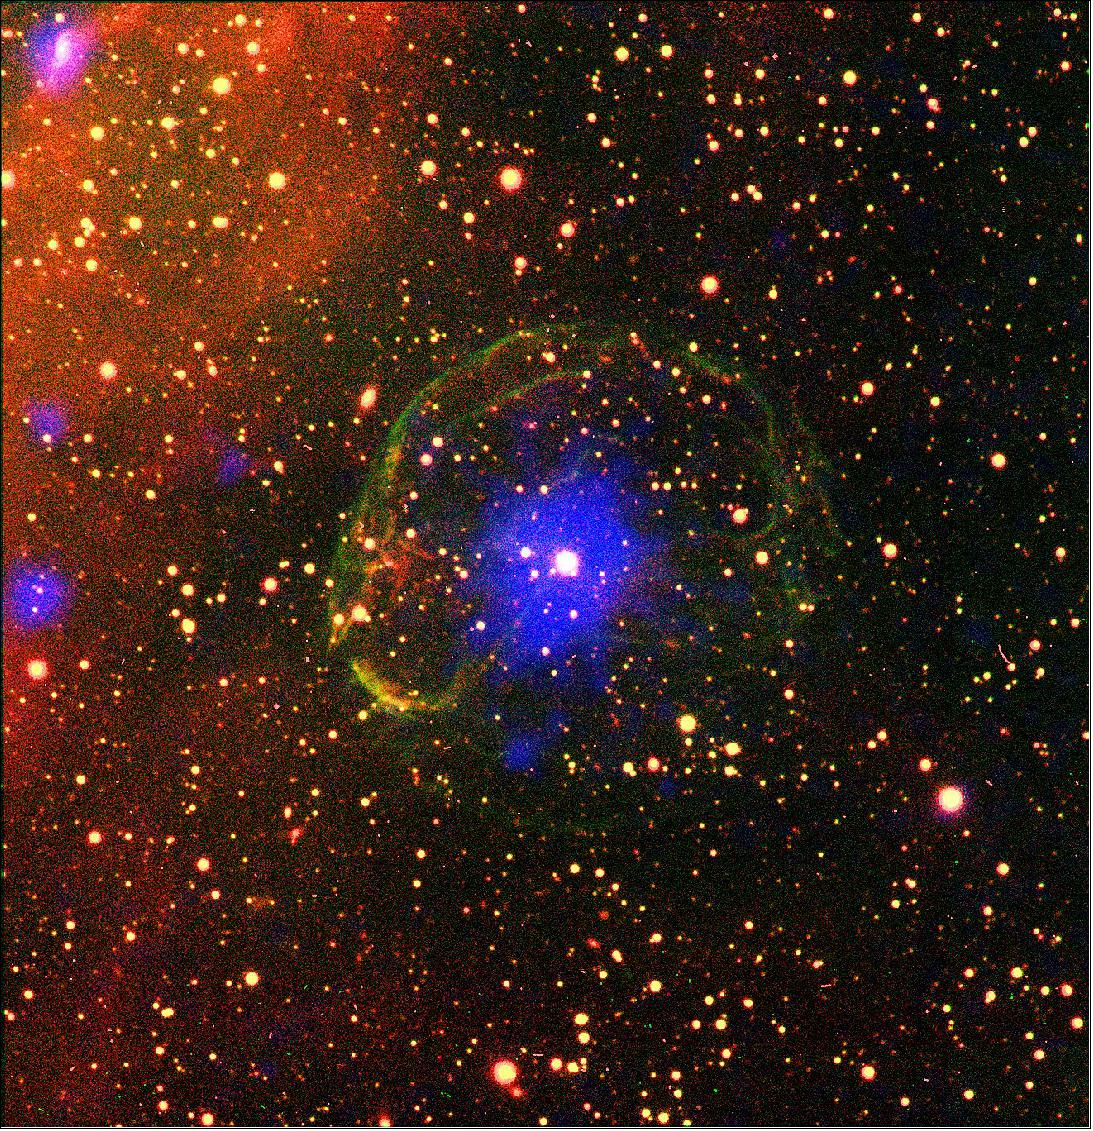 Figure 126: This image is a composite view of the newly discovered X-ray pulsar SXP 1062 still embedded in the remnant of the supernova that created it. SXP 1062 accretes mass from its stellar companion, a massive, hot, blue 'Be' star, the two objects forming a Be/X-ray binary [image credit: ESA/XMM-Newton/L. Oskinova, University of Potsdam, Germany/M. Guerrero, Instituto de Astrofisica de Andalucia, Spain (X-ray); Cerro Tololo Inter-American Observatory/R. Gruendl & Y. H. Chu, University of Illinois at Urbana-Champaign, USA (optical)]